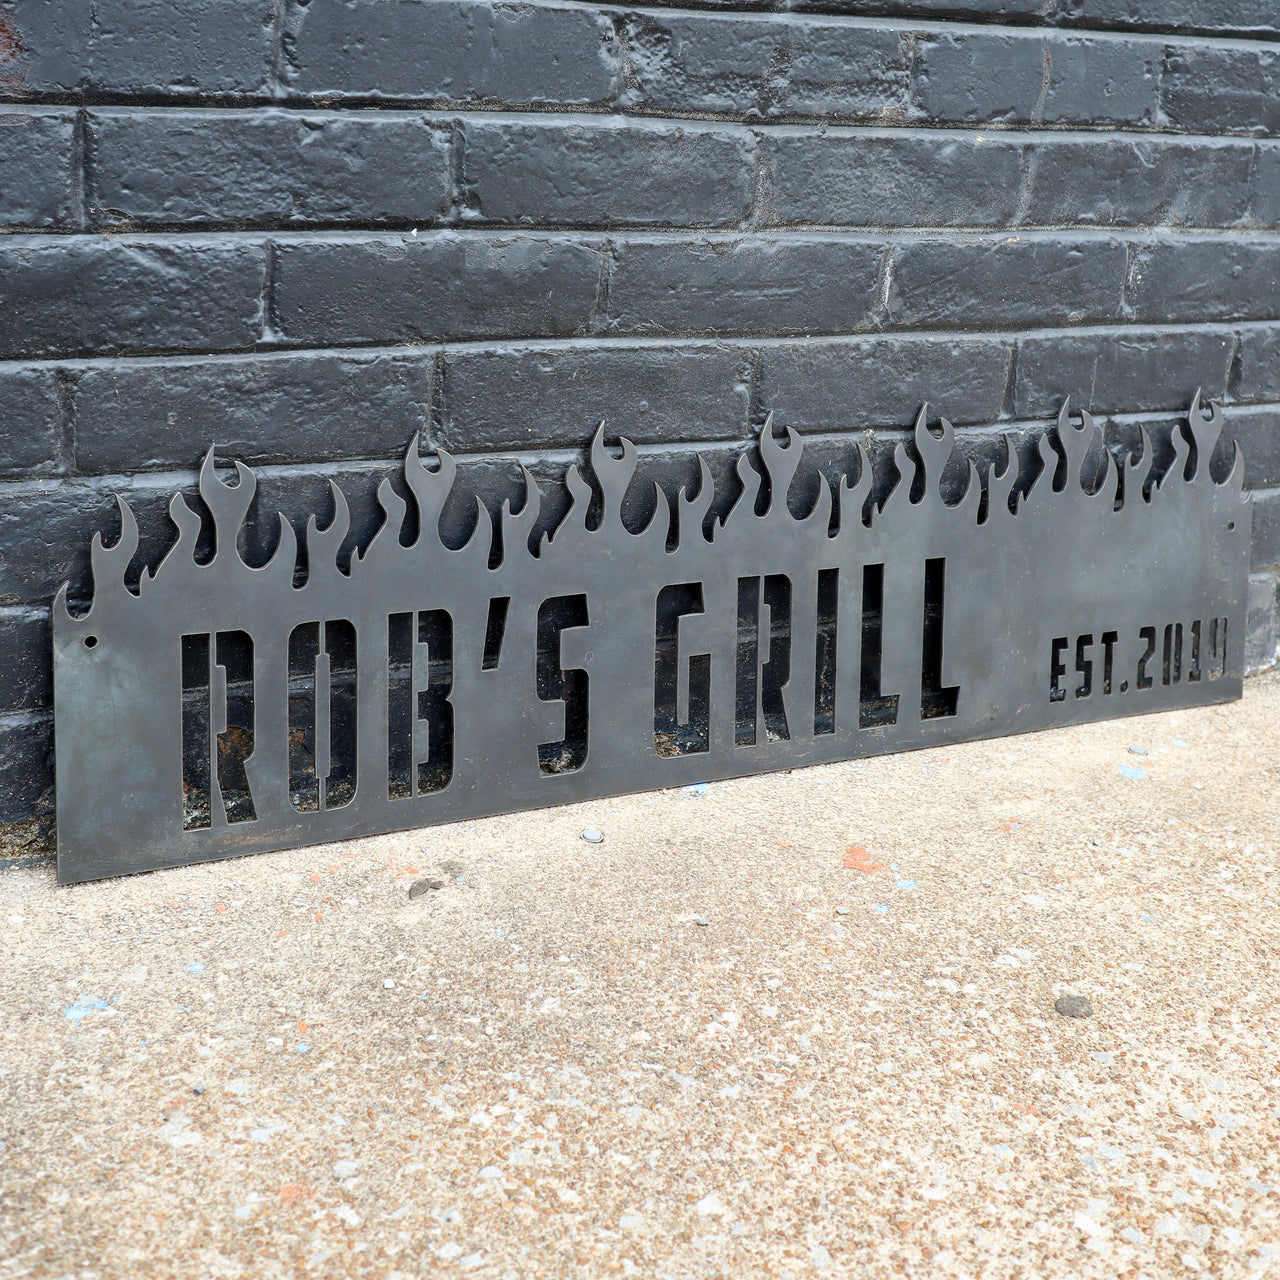 Personal Grill BBQ Metal Sign - Father's Day - Personalized Barbeque, Barbecue, Smoker Decor - Green Egg, Traeger Established Date